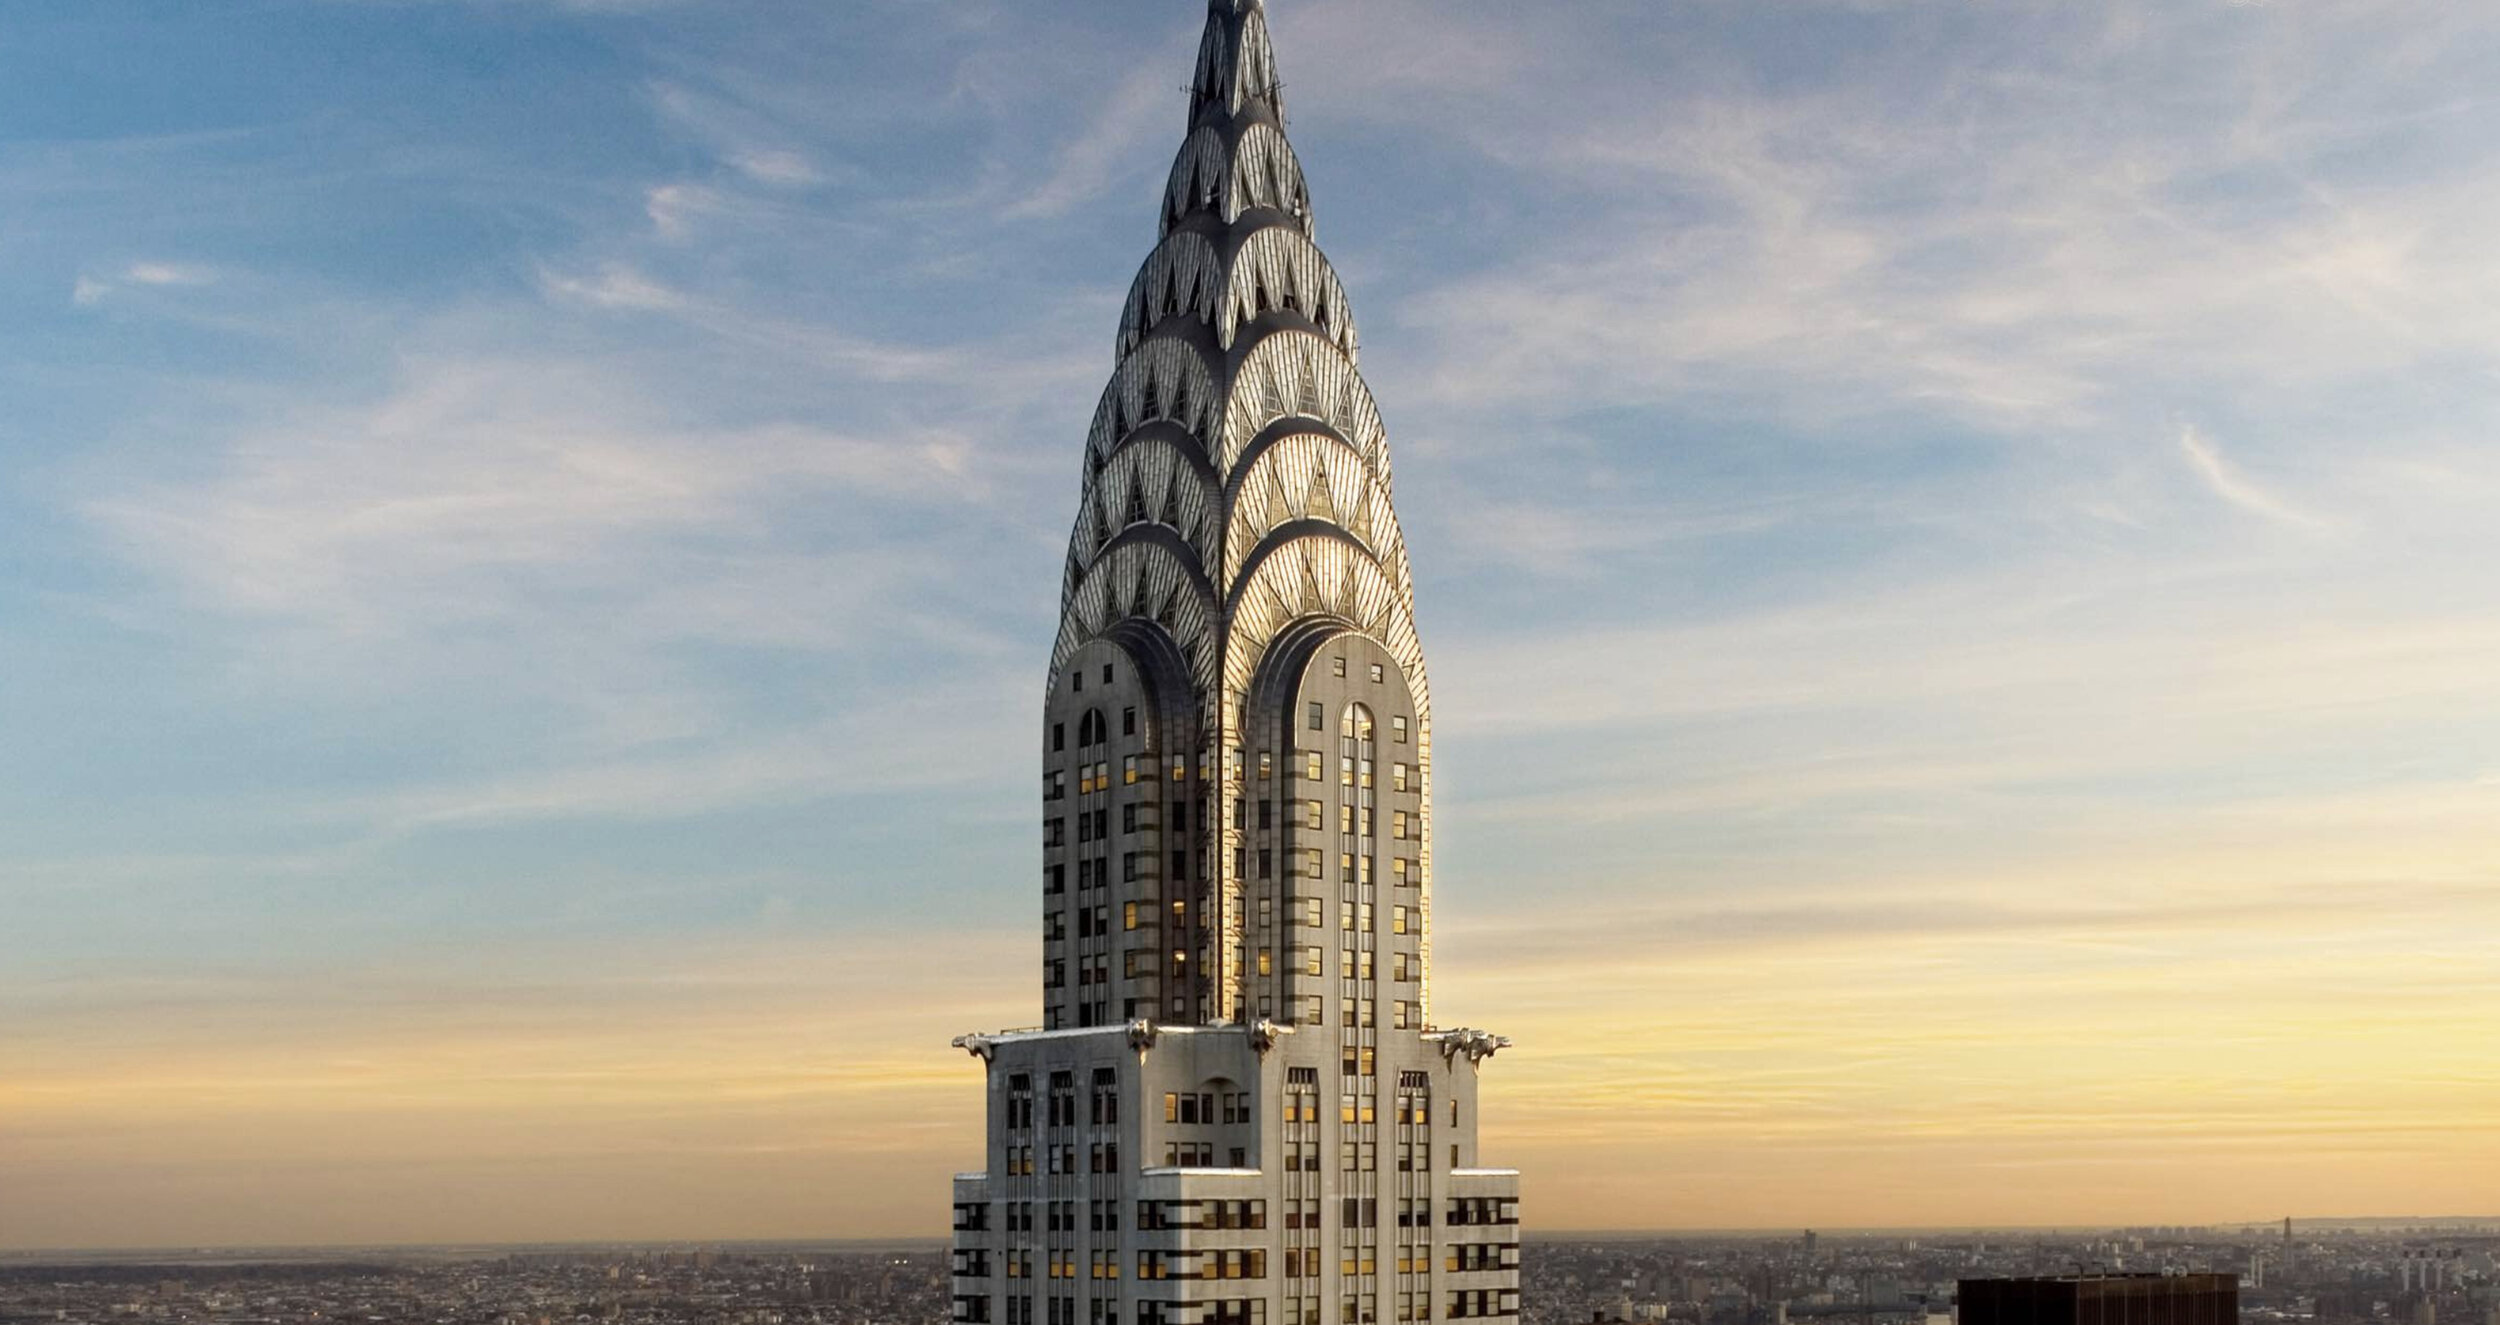 The Top 10 Tallest Buildings in New York City